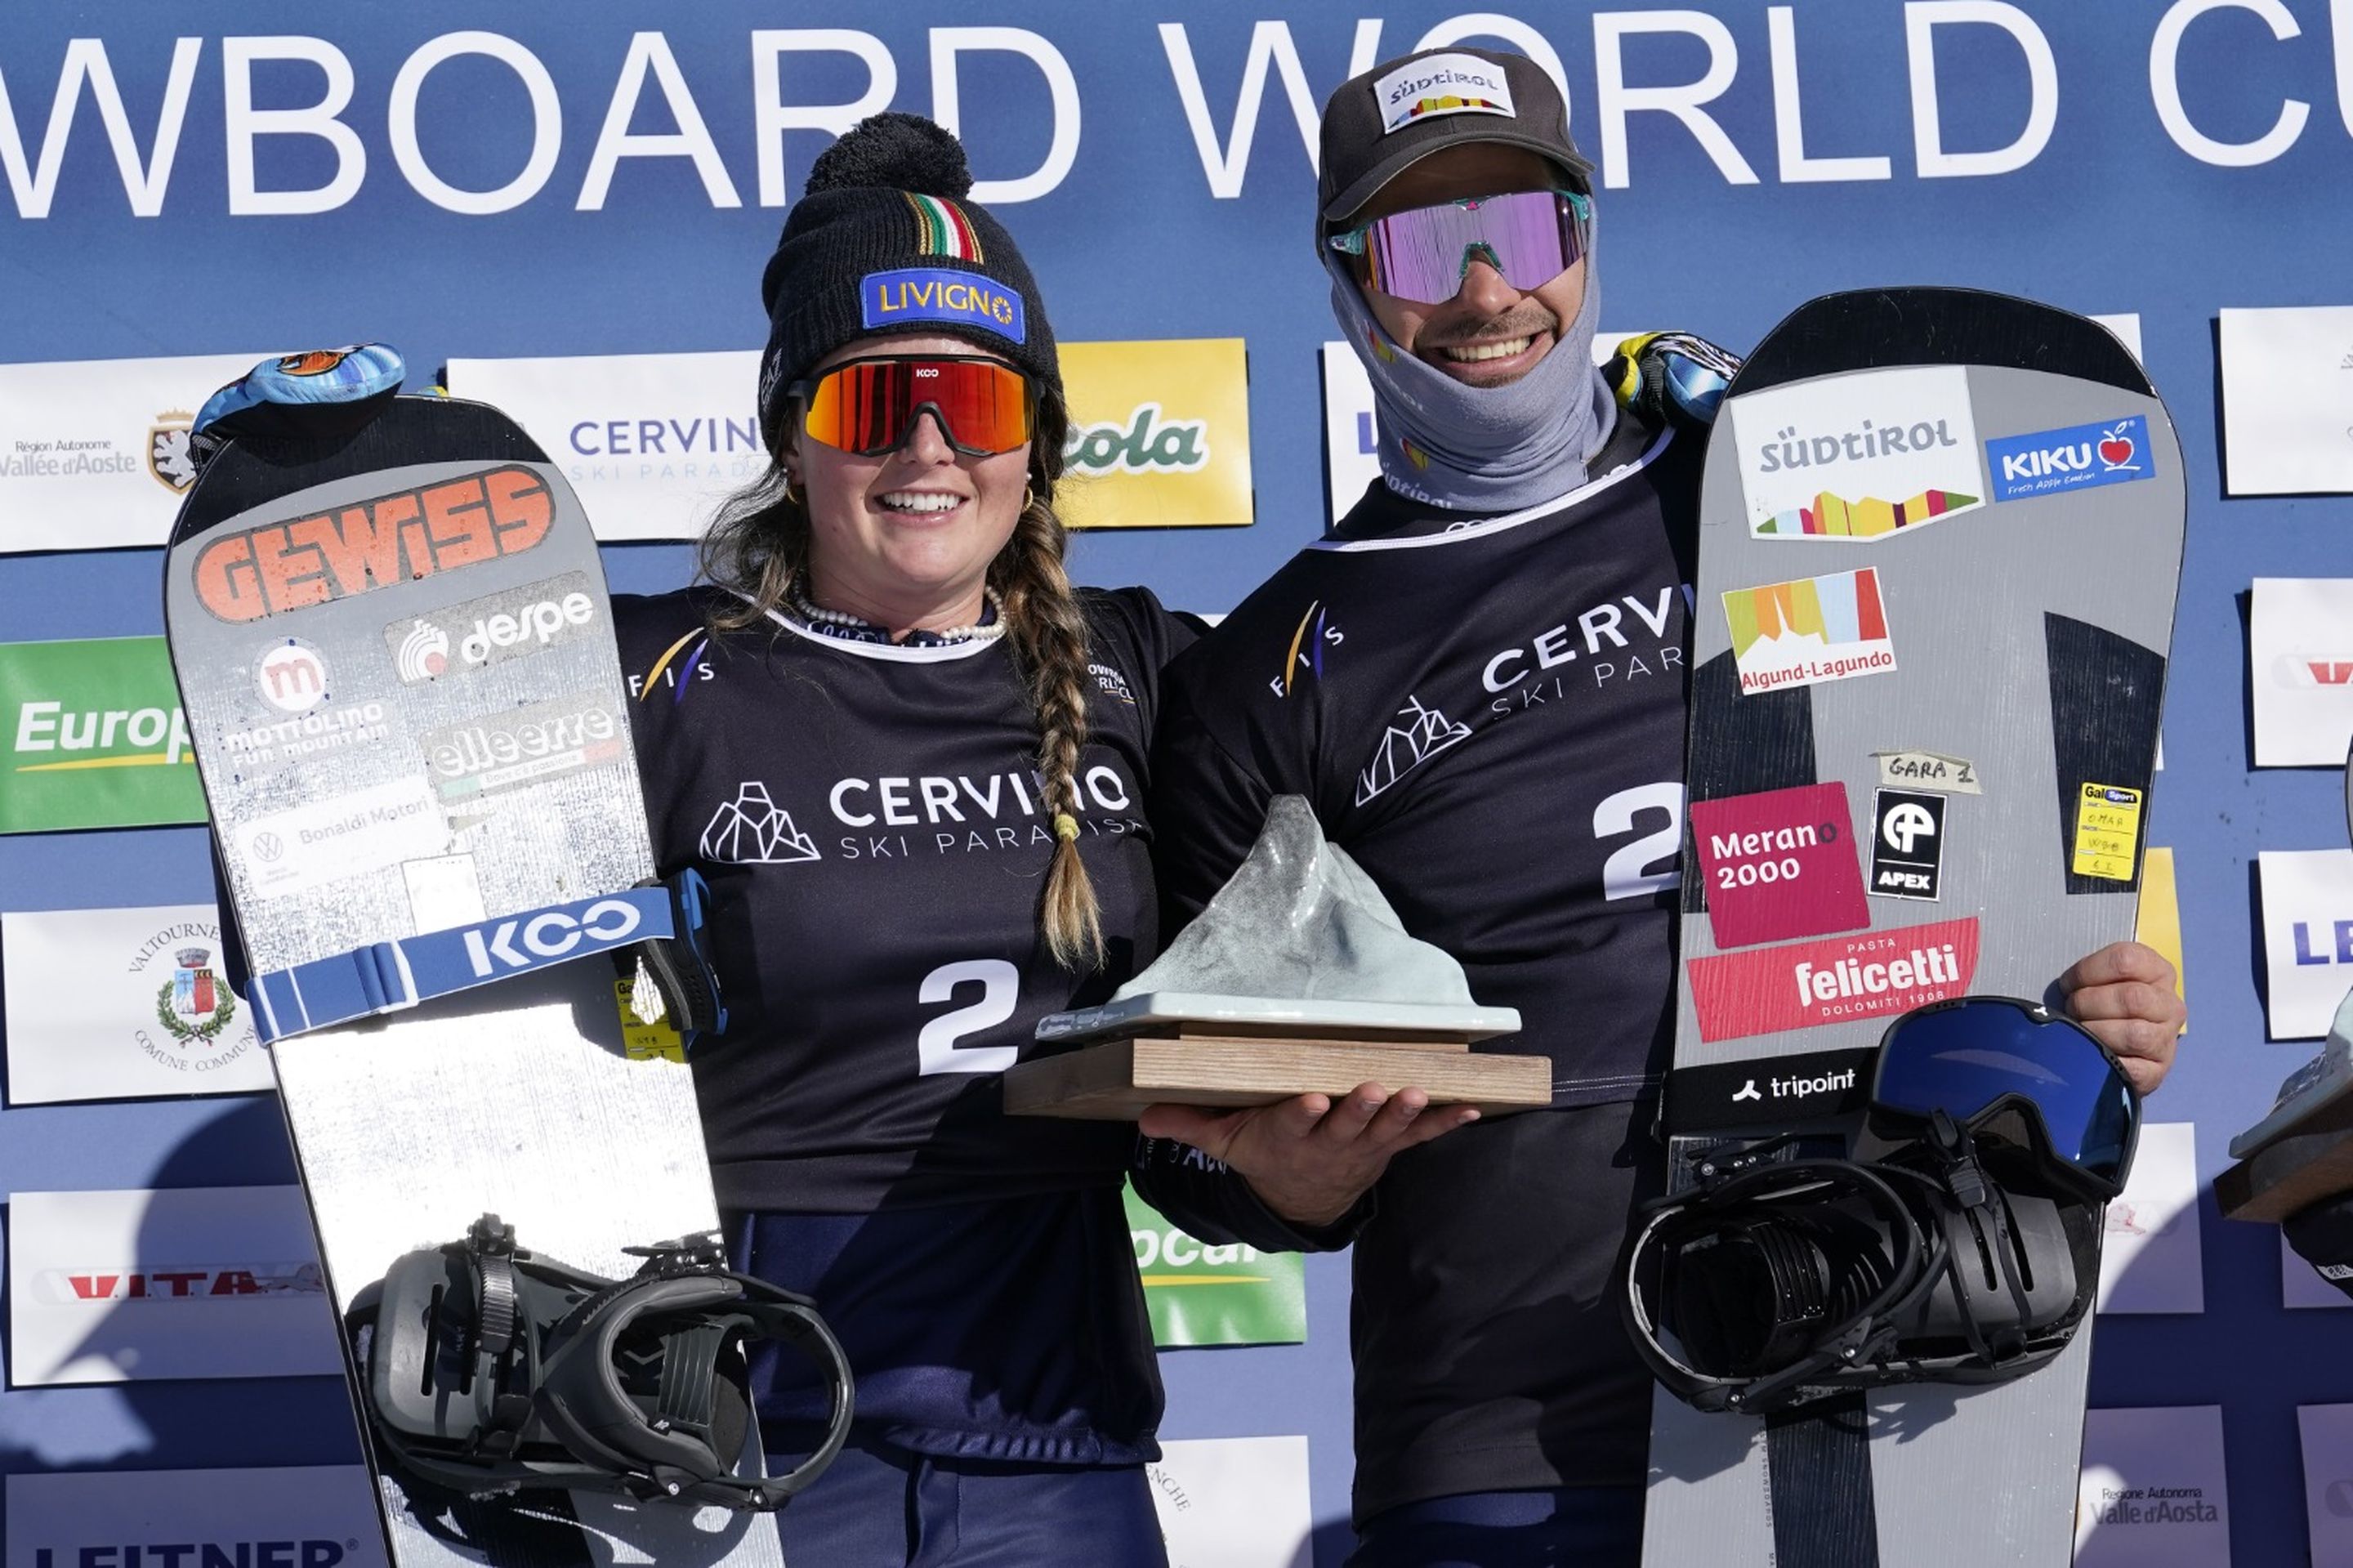 Moioli and Visintin celebrate first place / Photo by: PENTAPHOTO